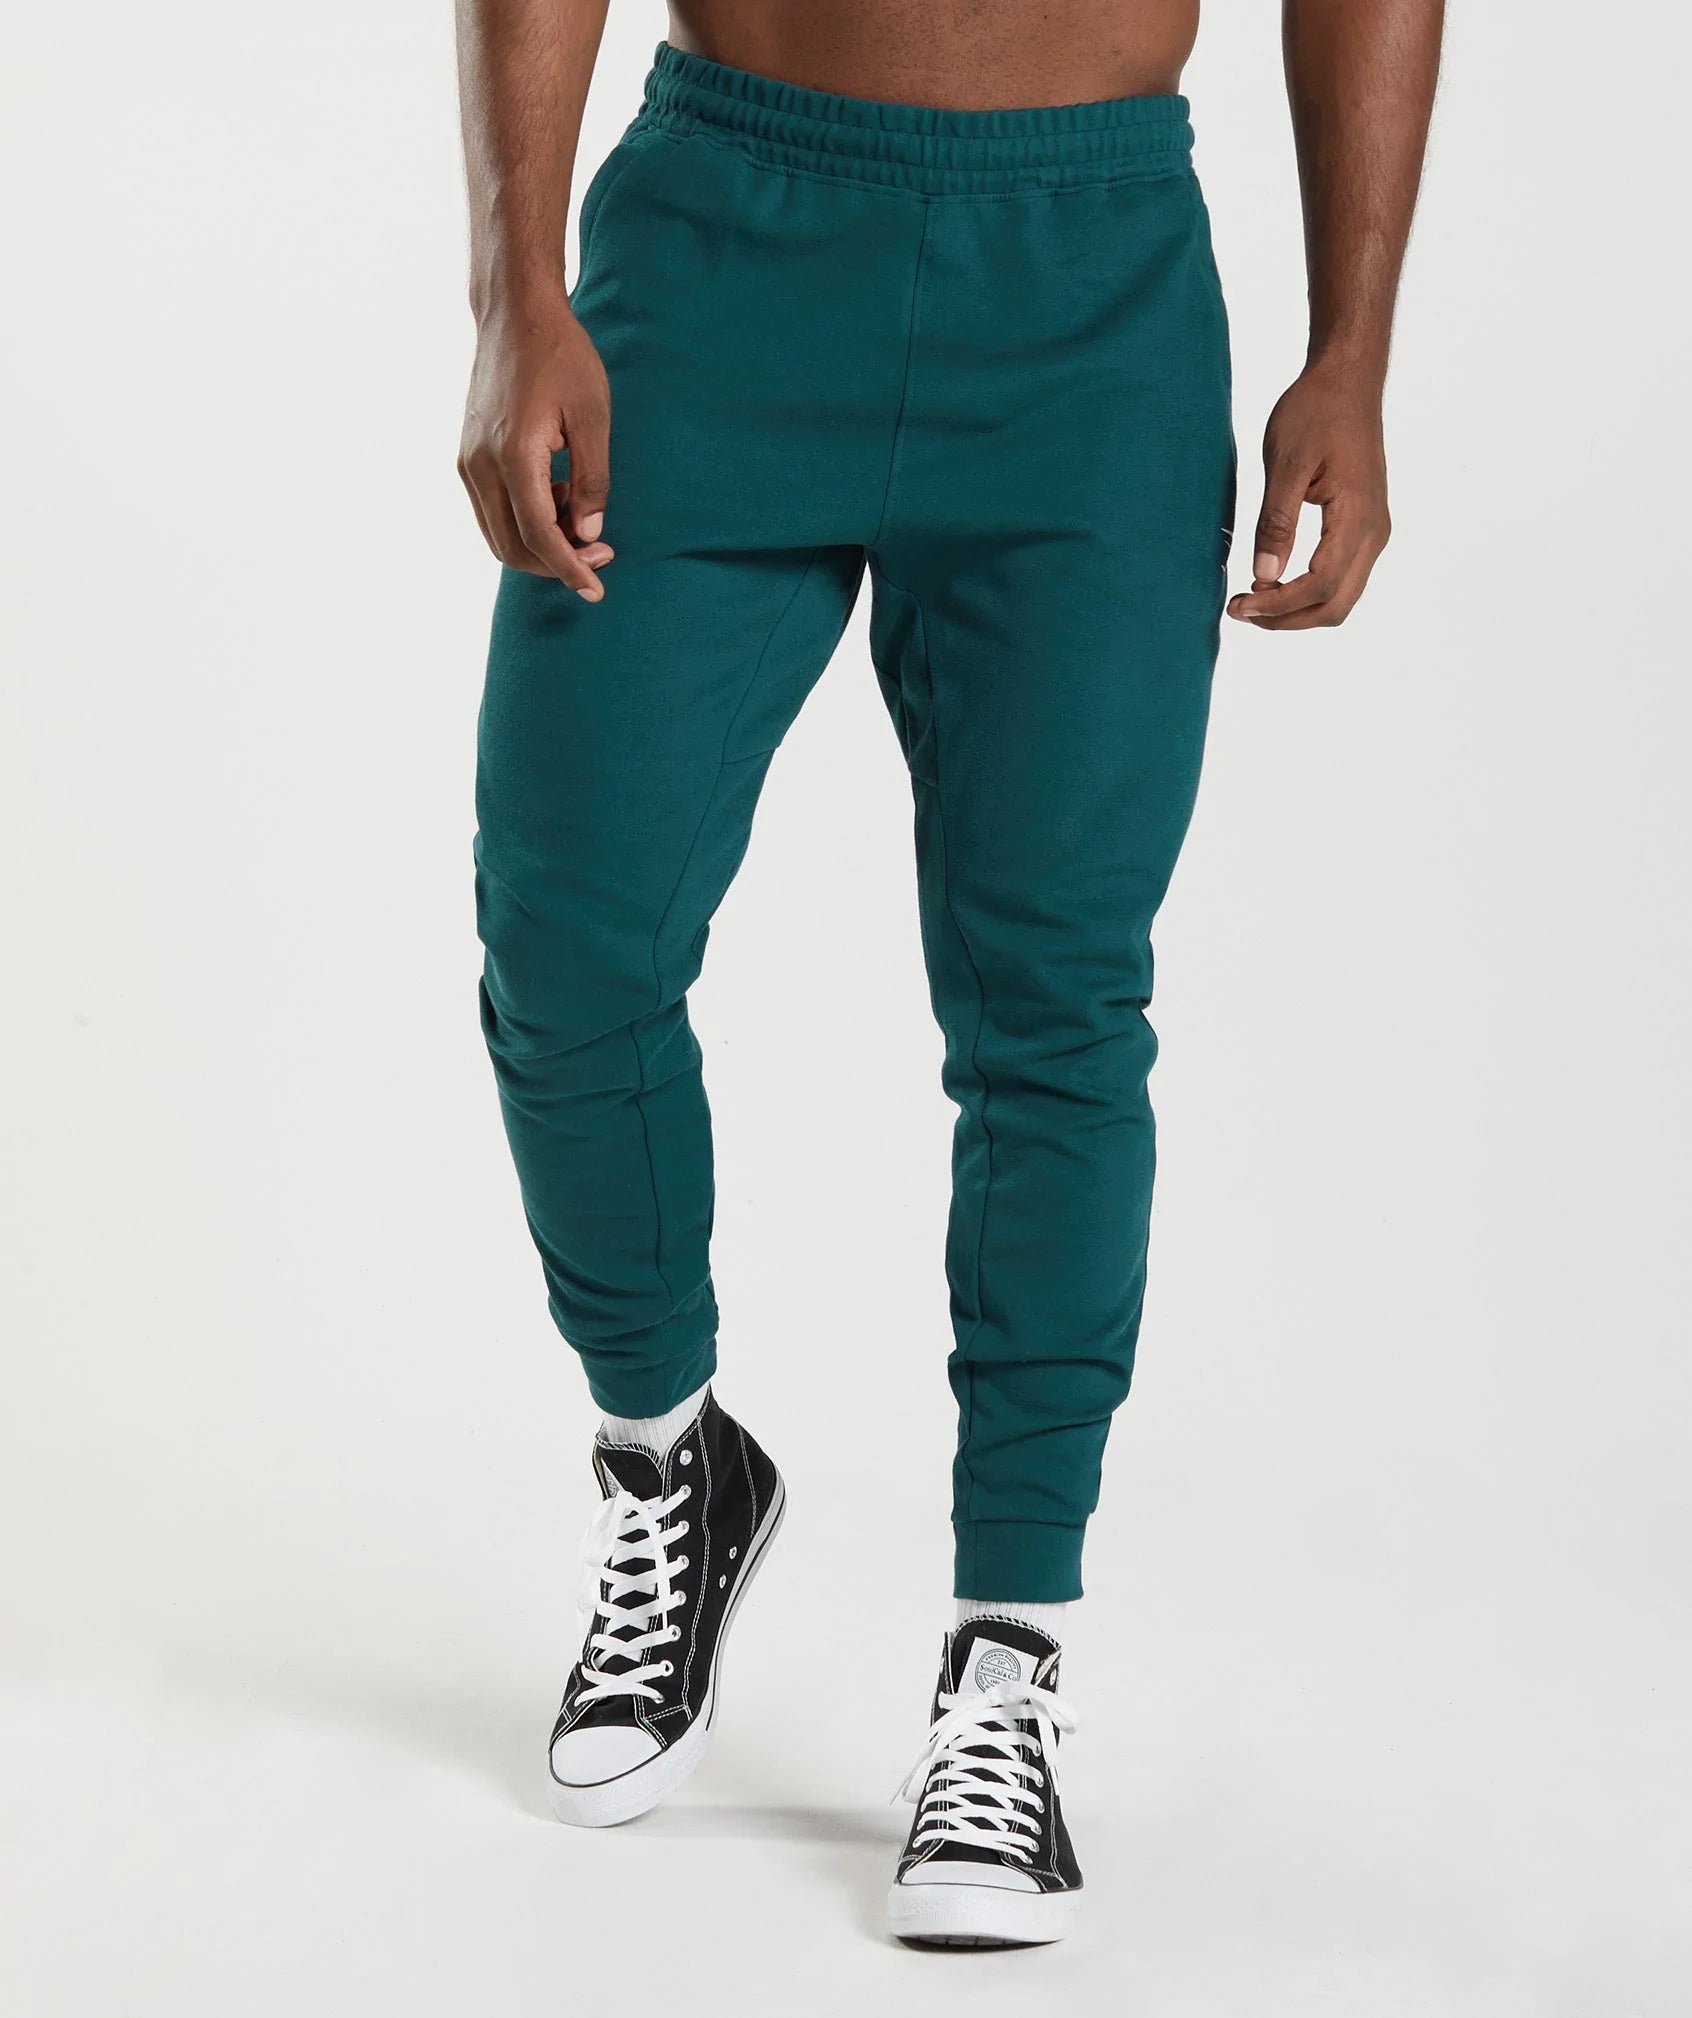 React Joggers in Winter Teal